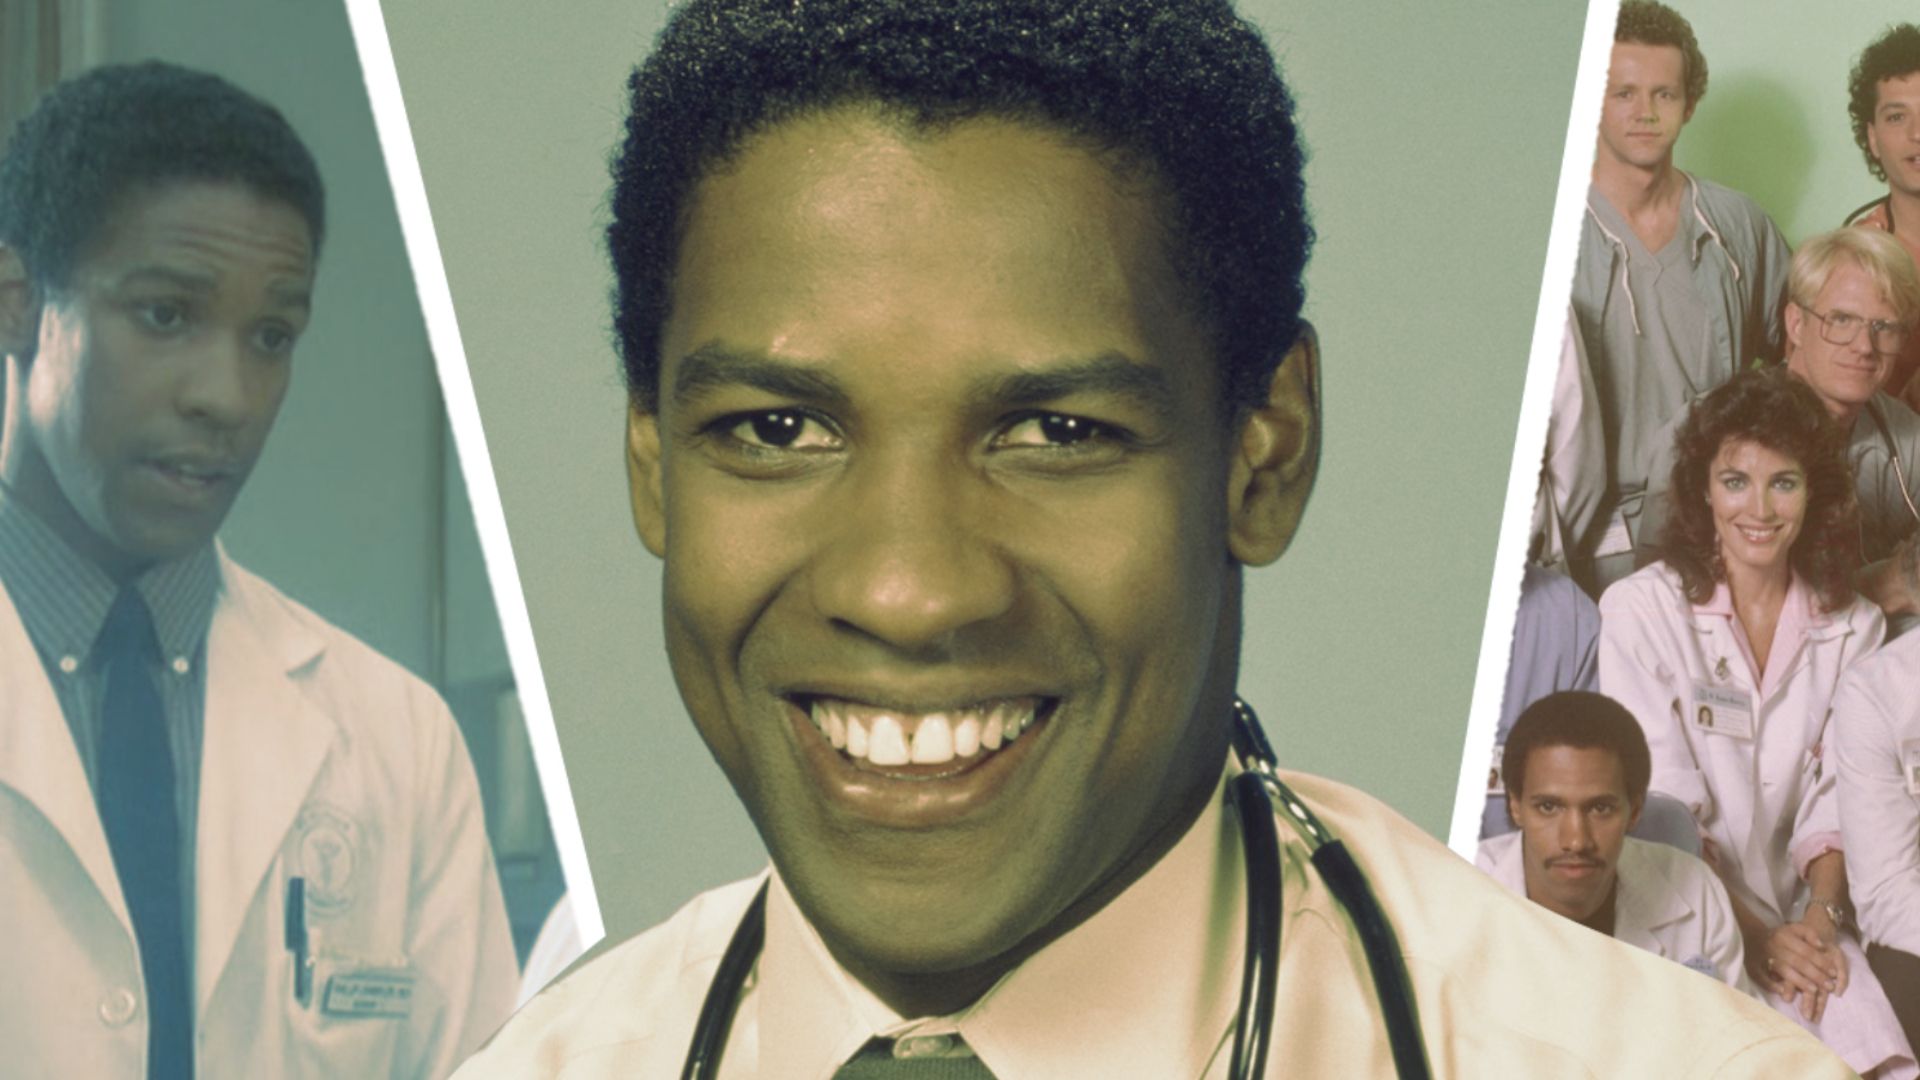 An edited image of Denzel Washington as Dr. Philip Chandler wearing a white gown and collared shirt in St. Elsewhere